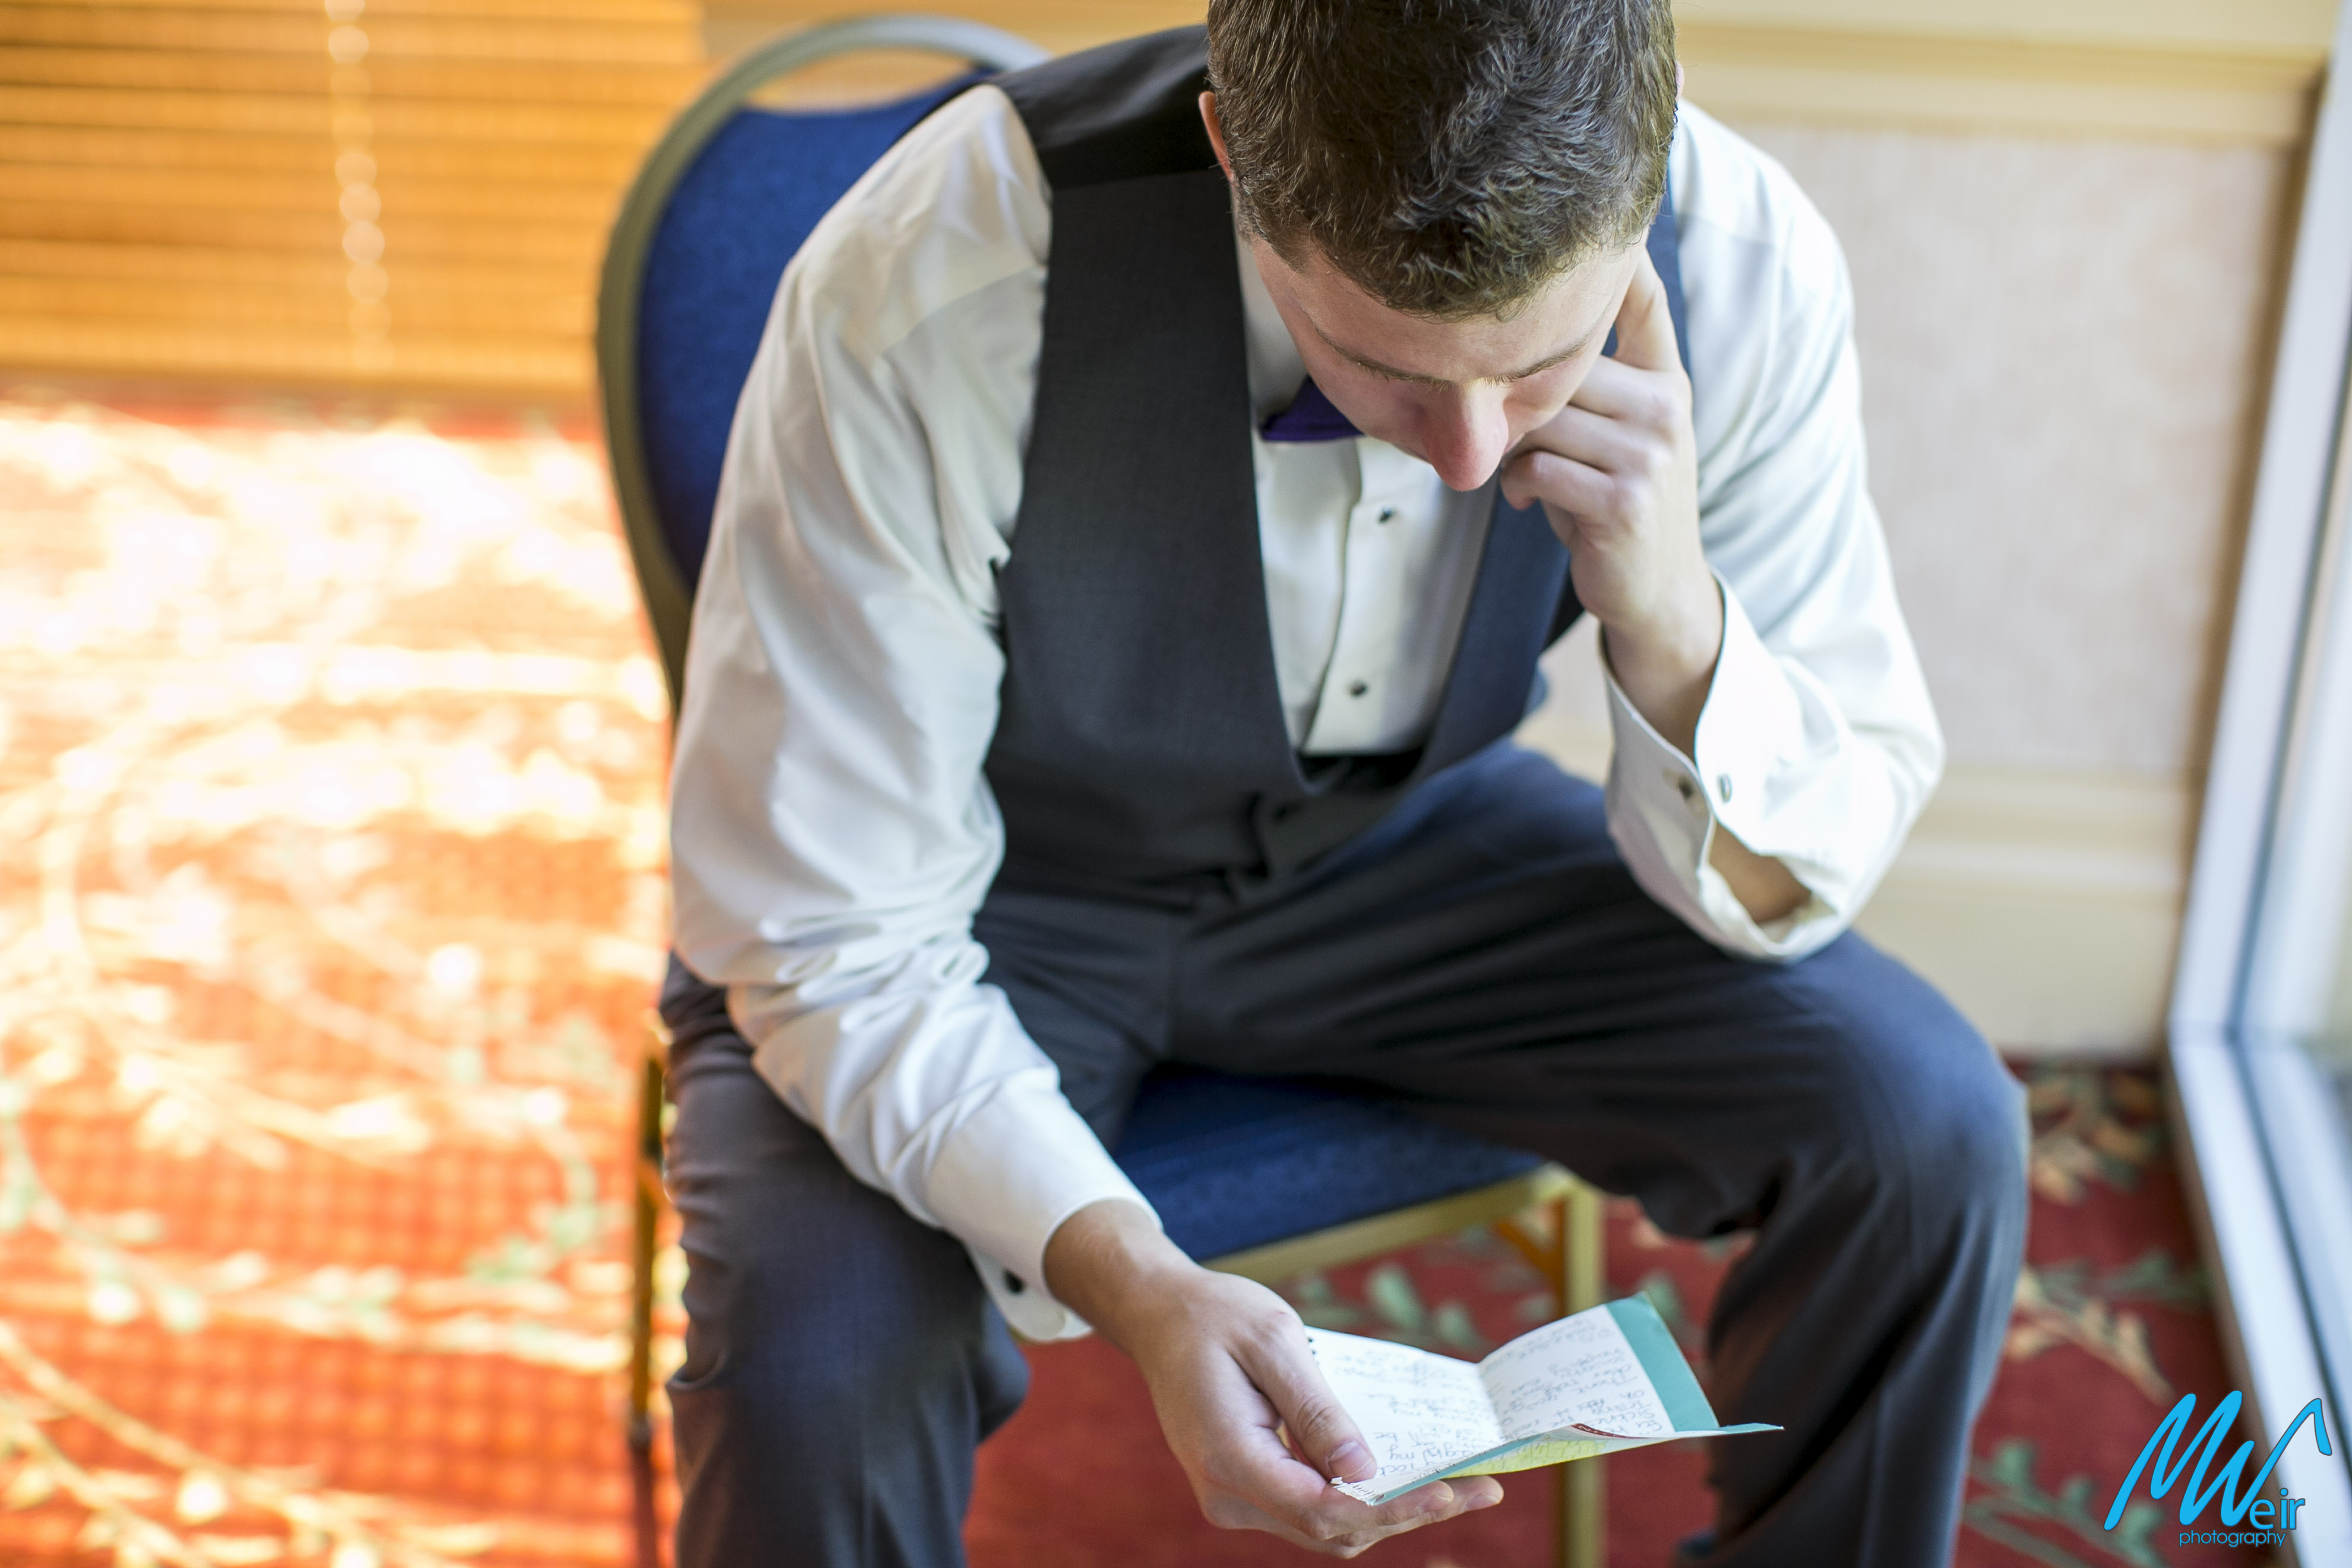 groom reading a note in hotel room from his bride